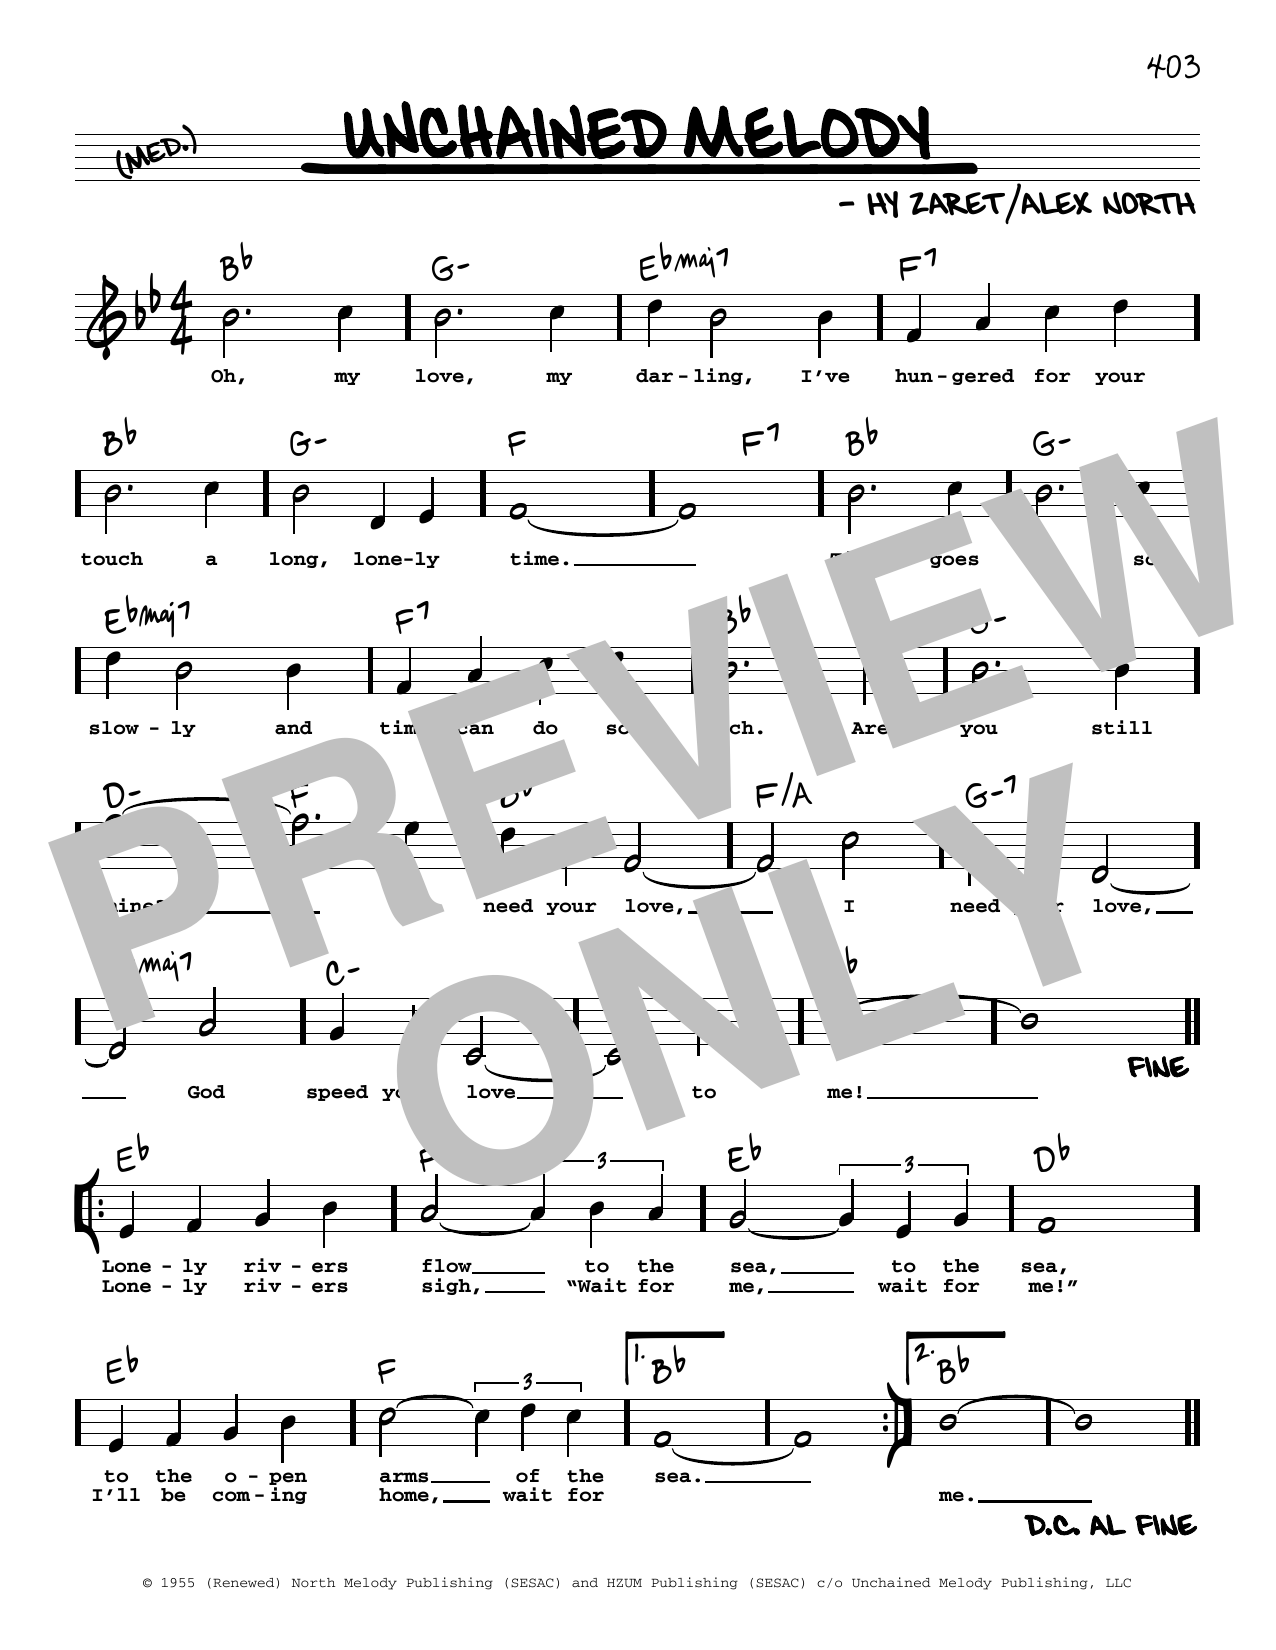 Download The Righteous Brothers Unchained Melody (High Voice) Sheet Music